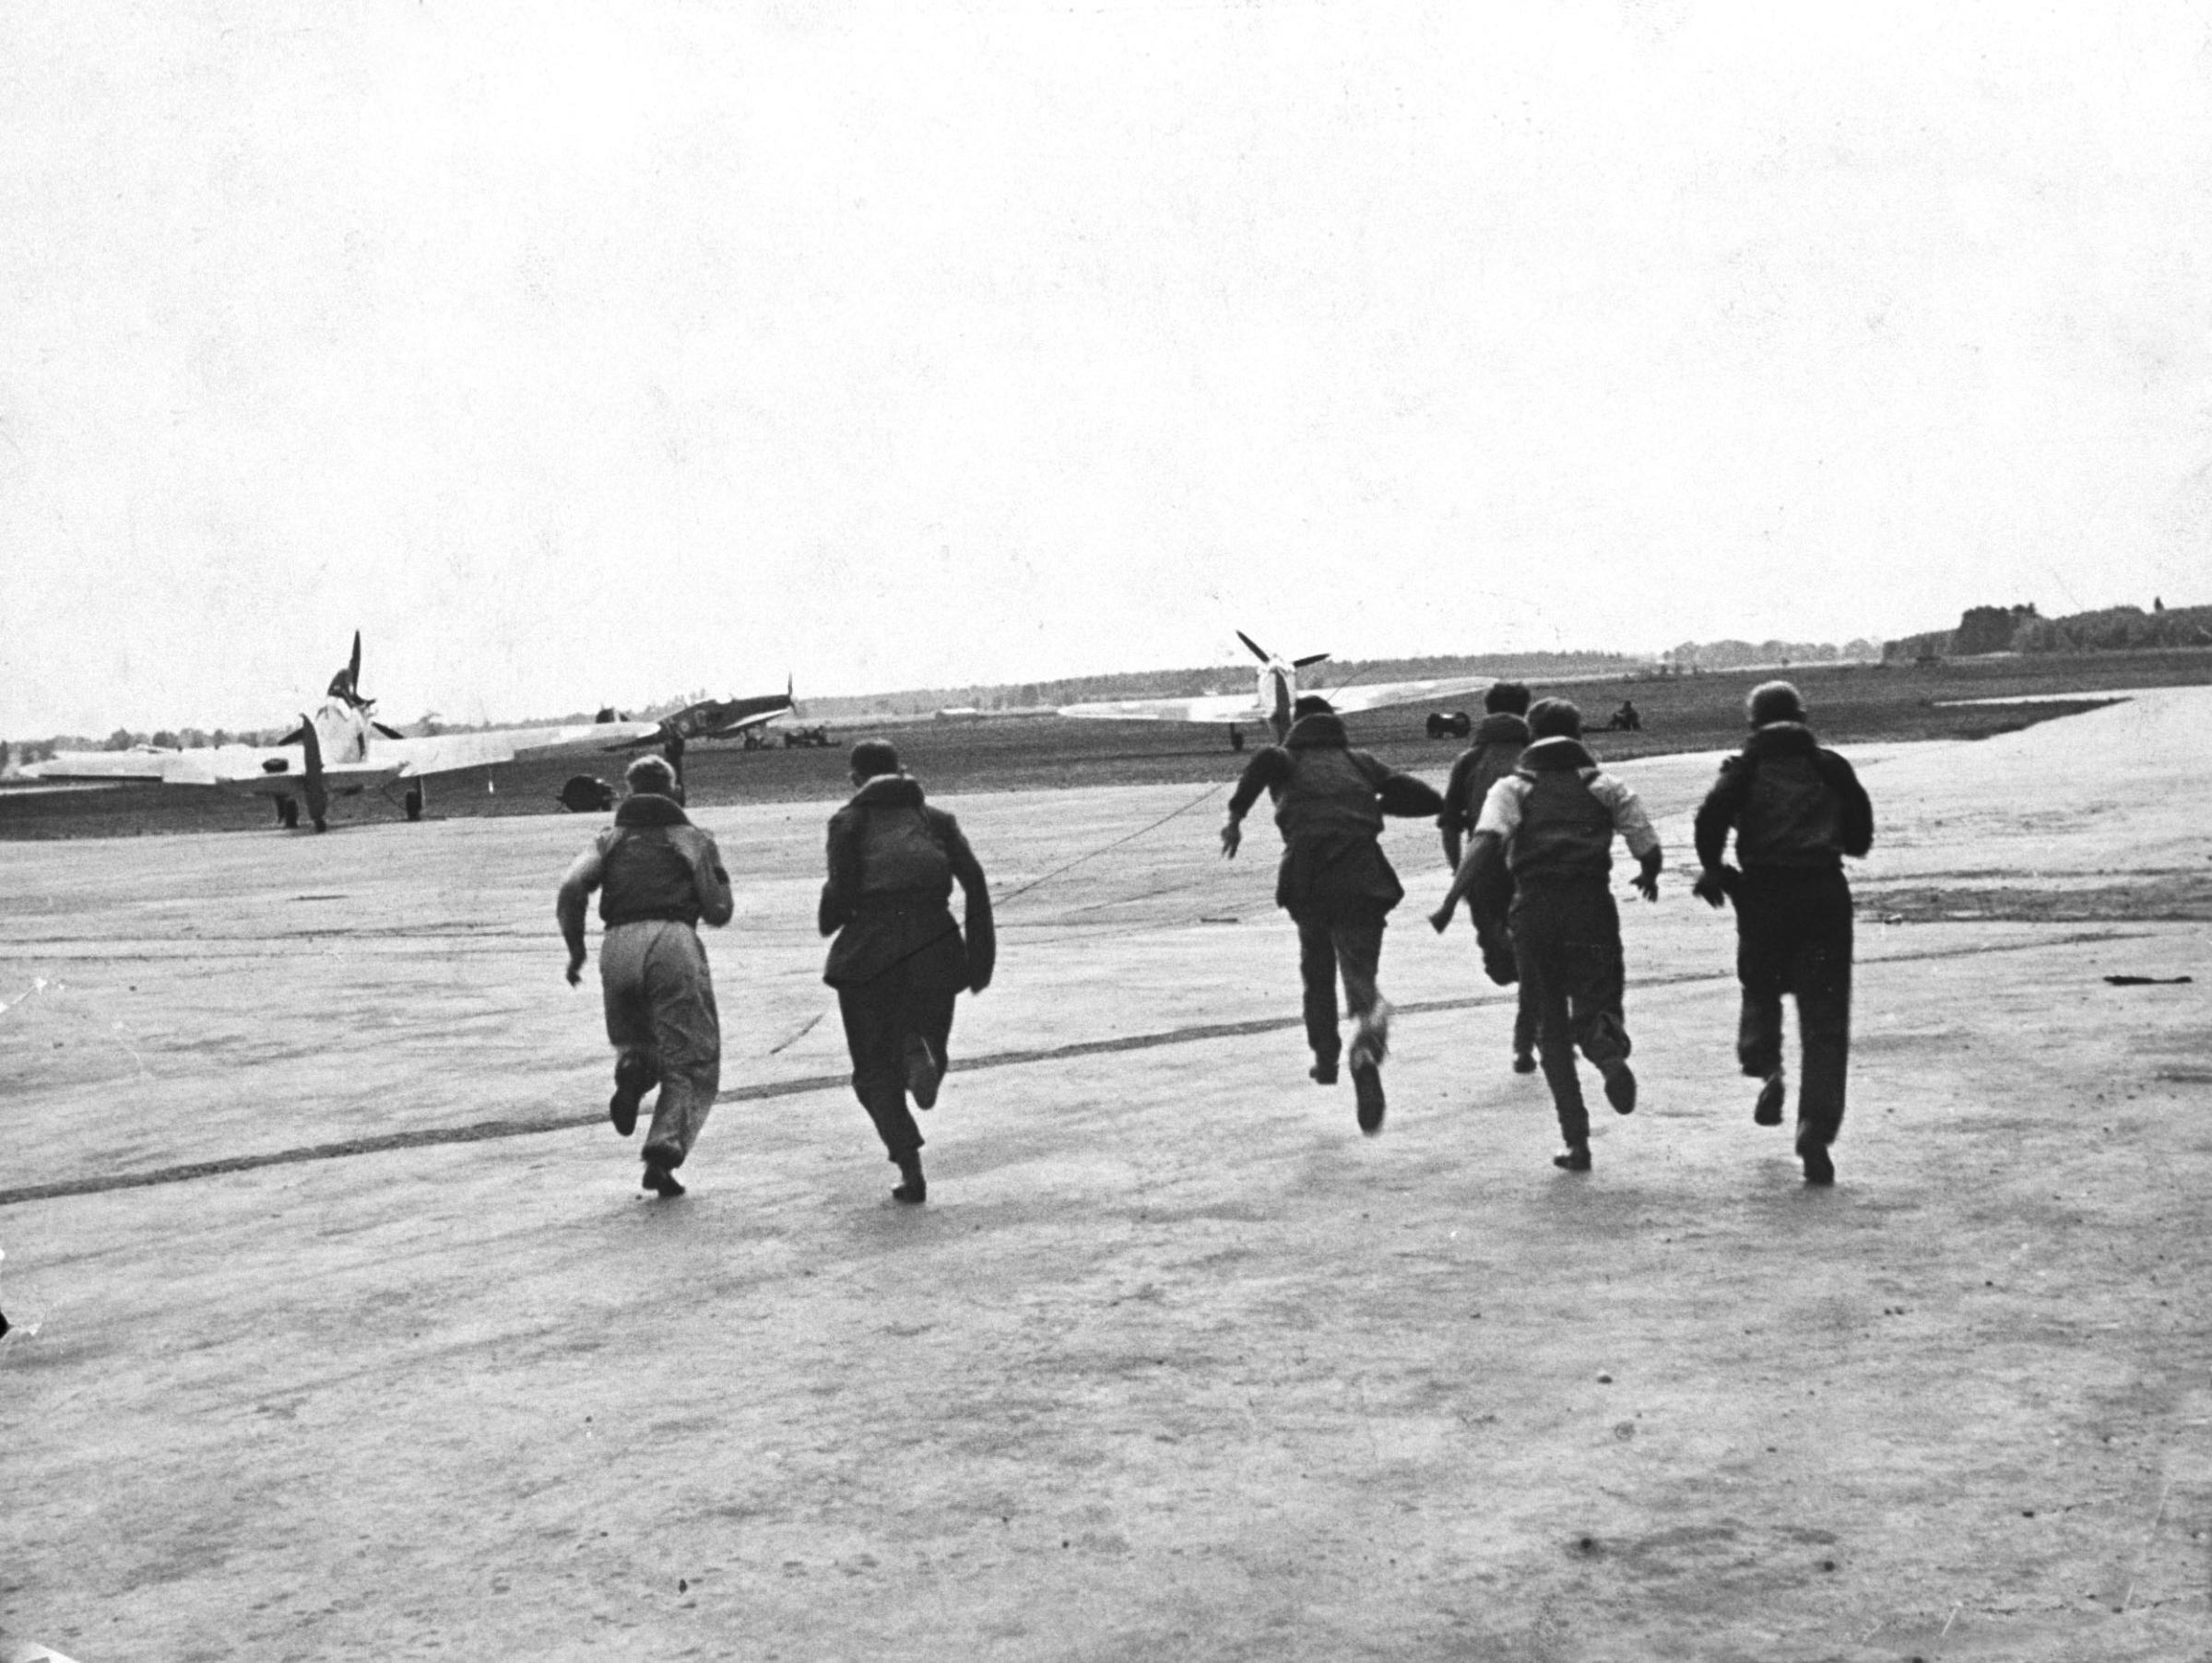 Pilots and aircrew members scramble to their planes during the Battle of Britain, RAF Fighter Command airfield, 1940.